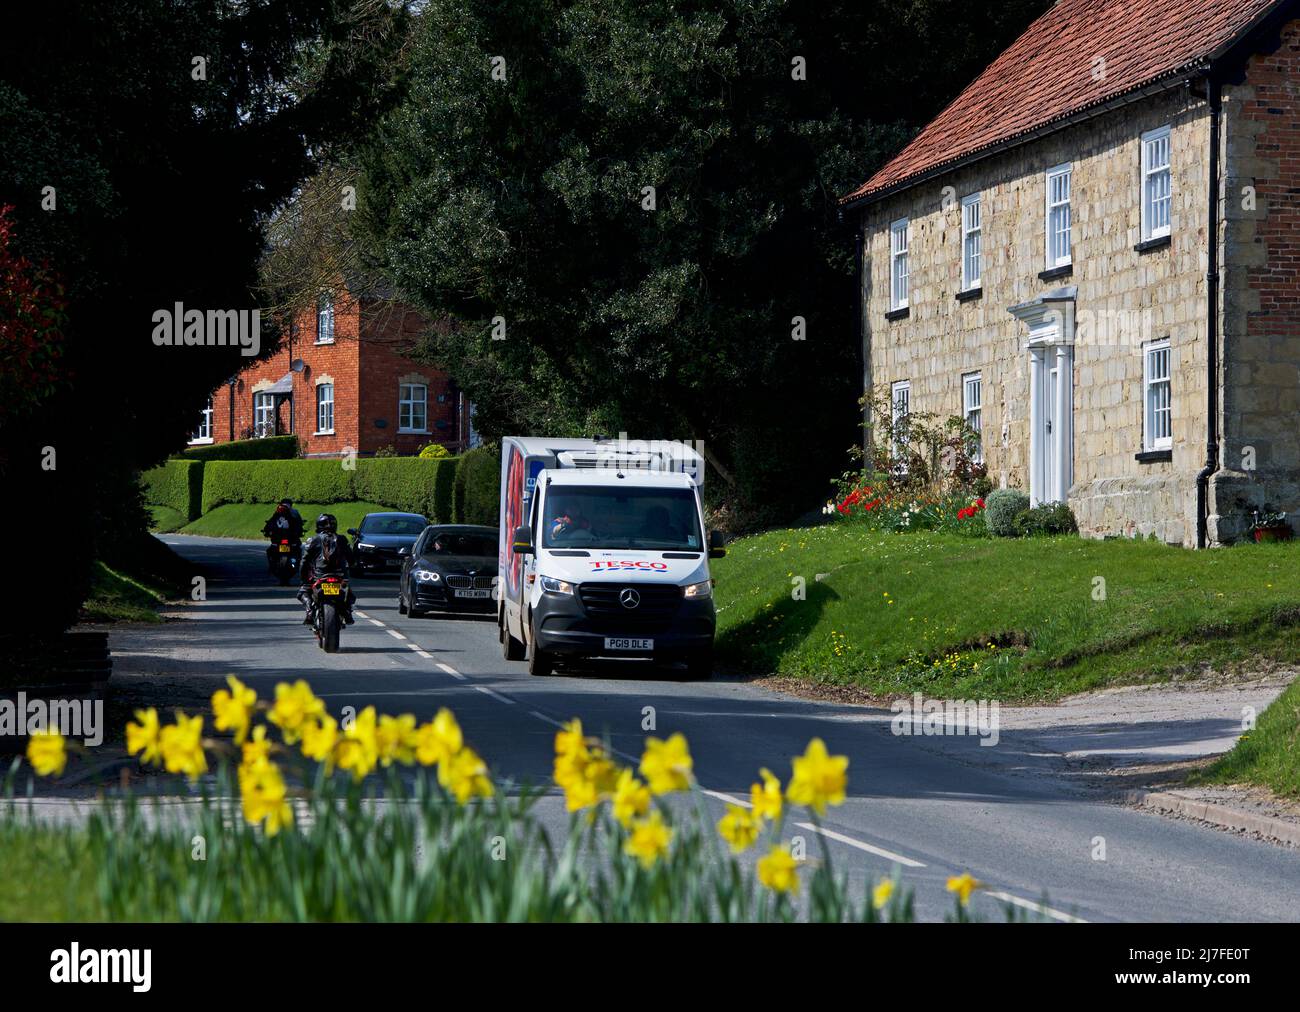 Tesco delivery van in the village of Warter, East Yorkshire, England UK Stock Photo